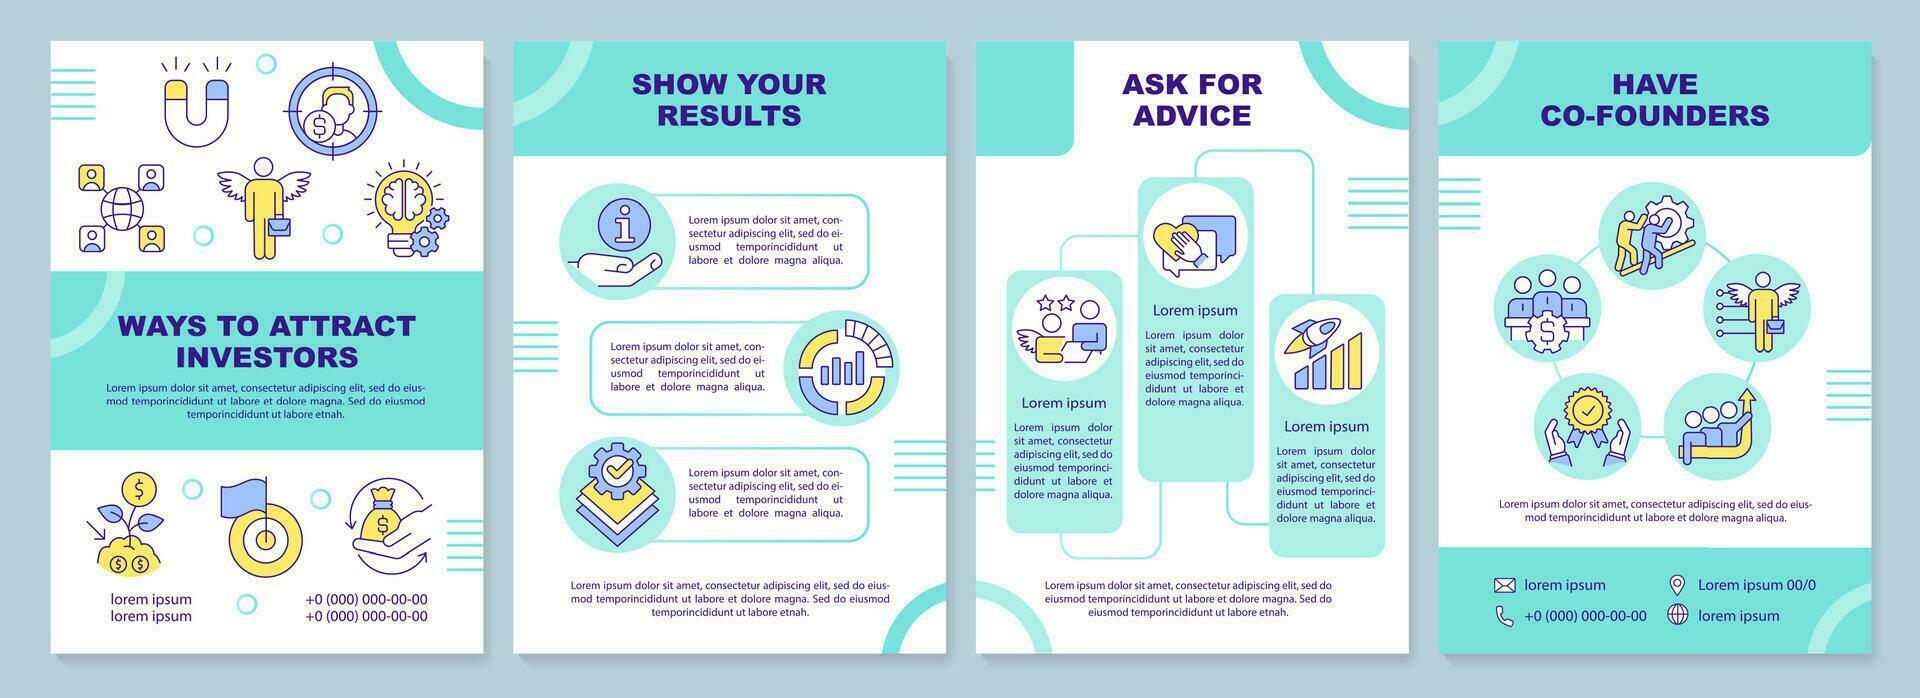 Ways to attract investors turquoise brochure template. Leaflet design with linear icons. Editable 4 vector layouts for presentation, annual reports